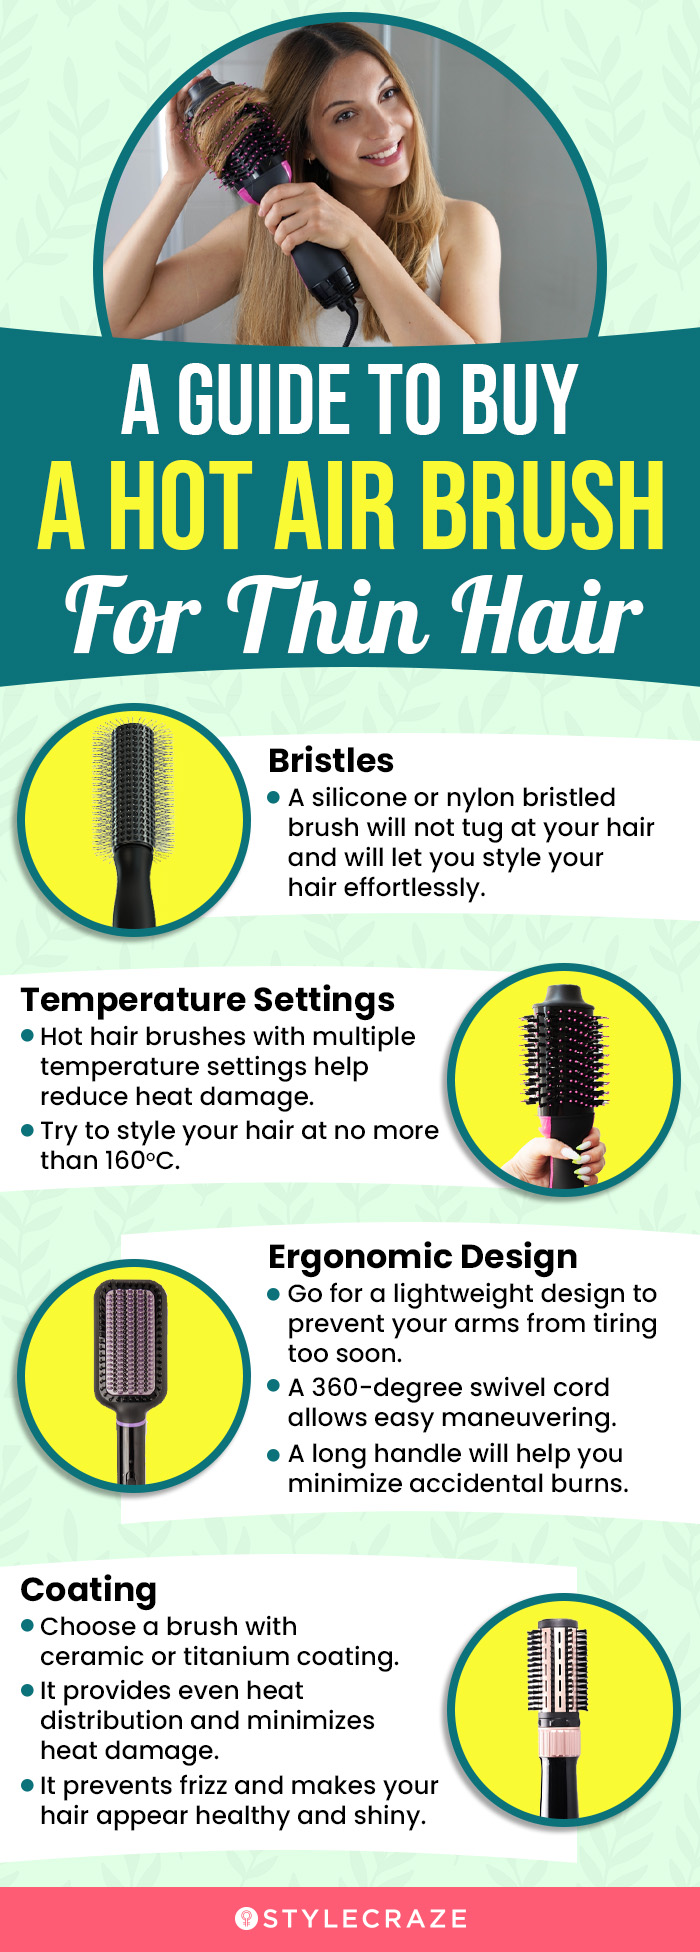 A Guide To Buy A Hot Air Brush For Thin Hair (infographic)